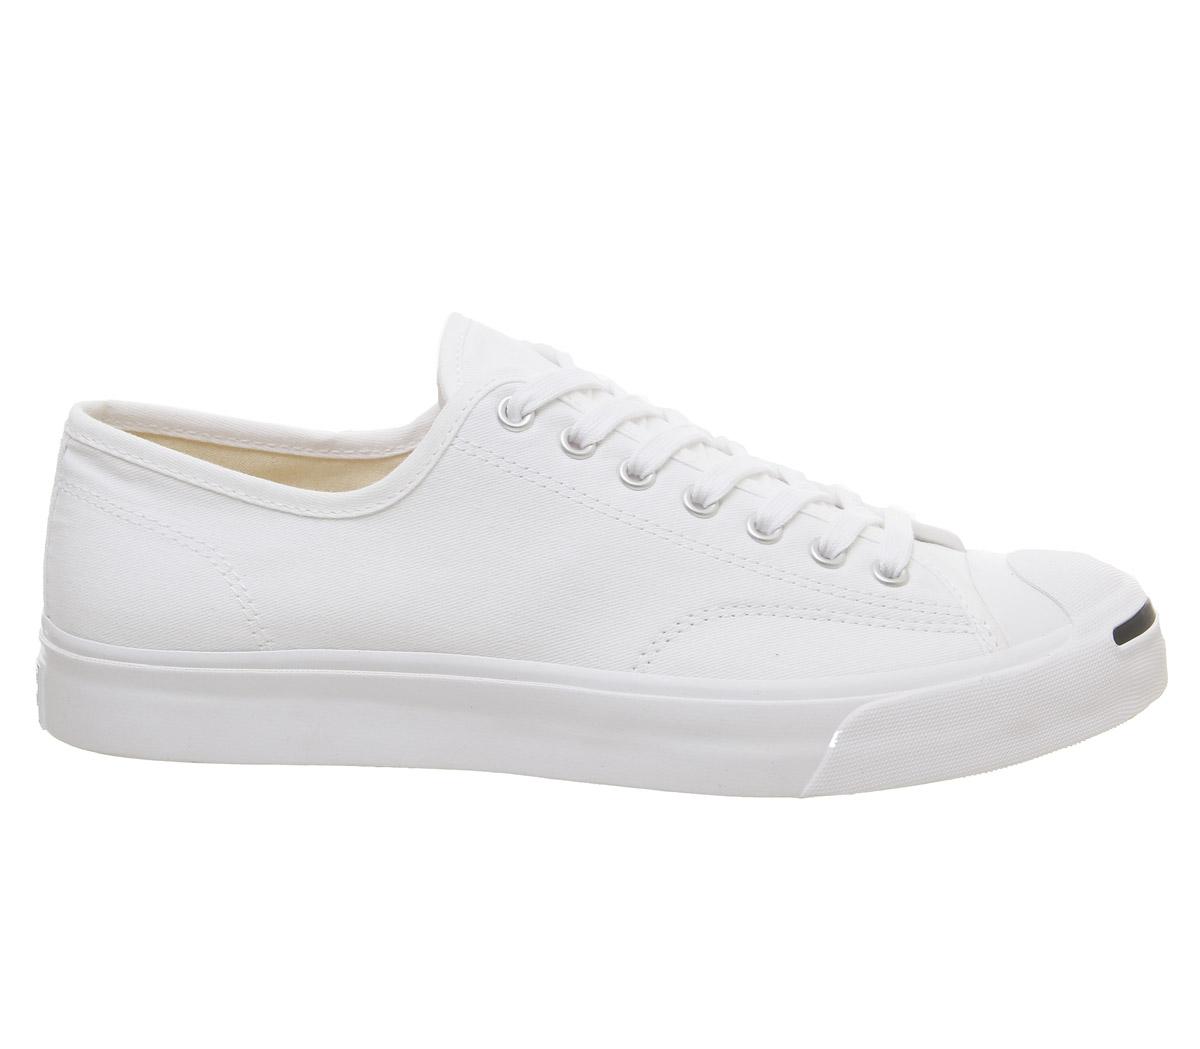 Converse Jack Purcell White - His trainers